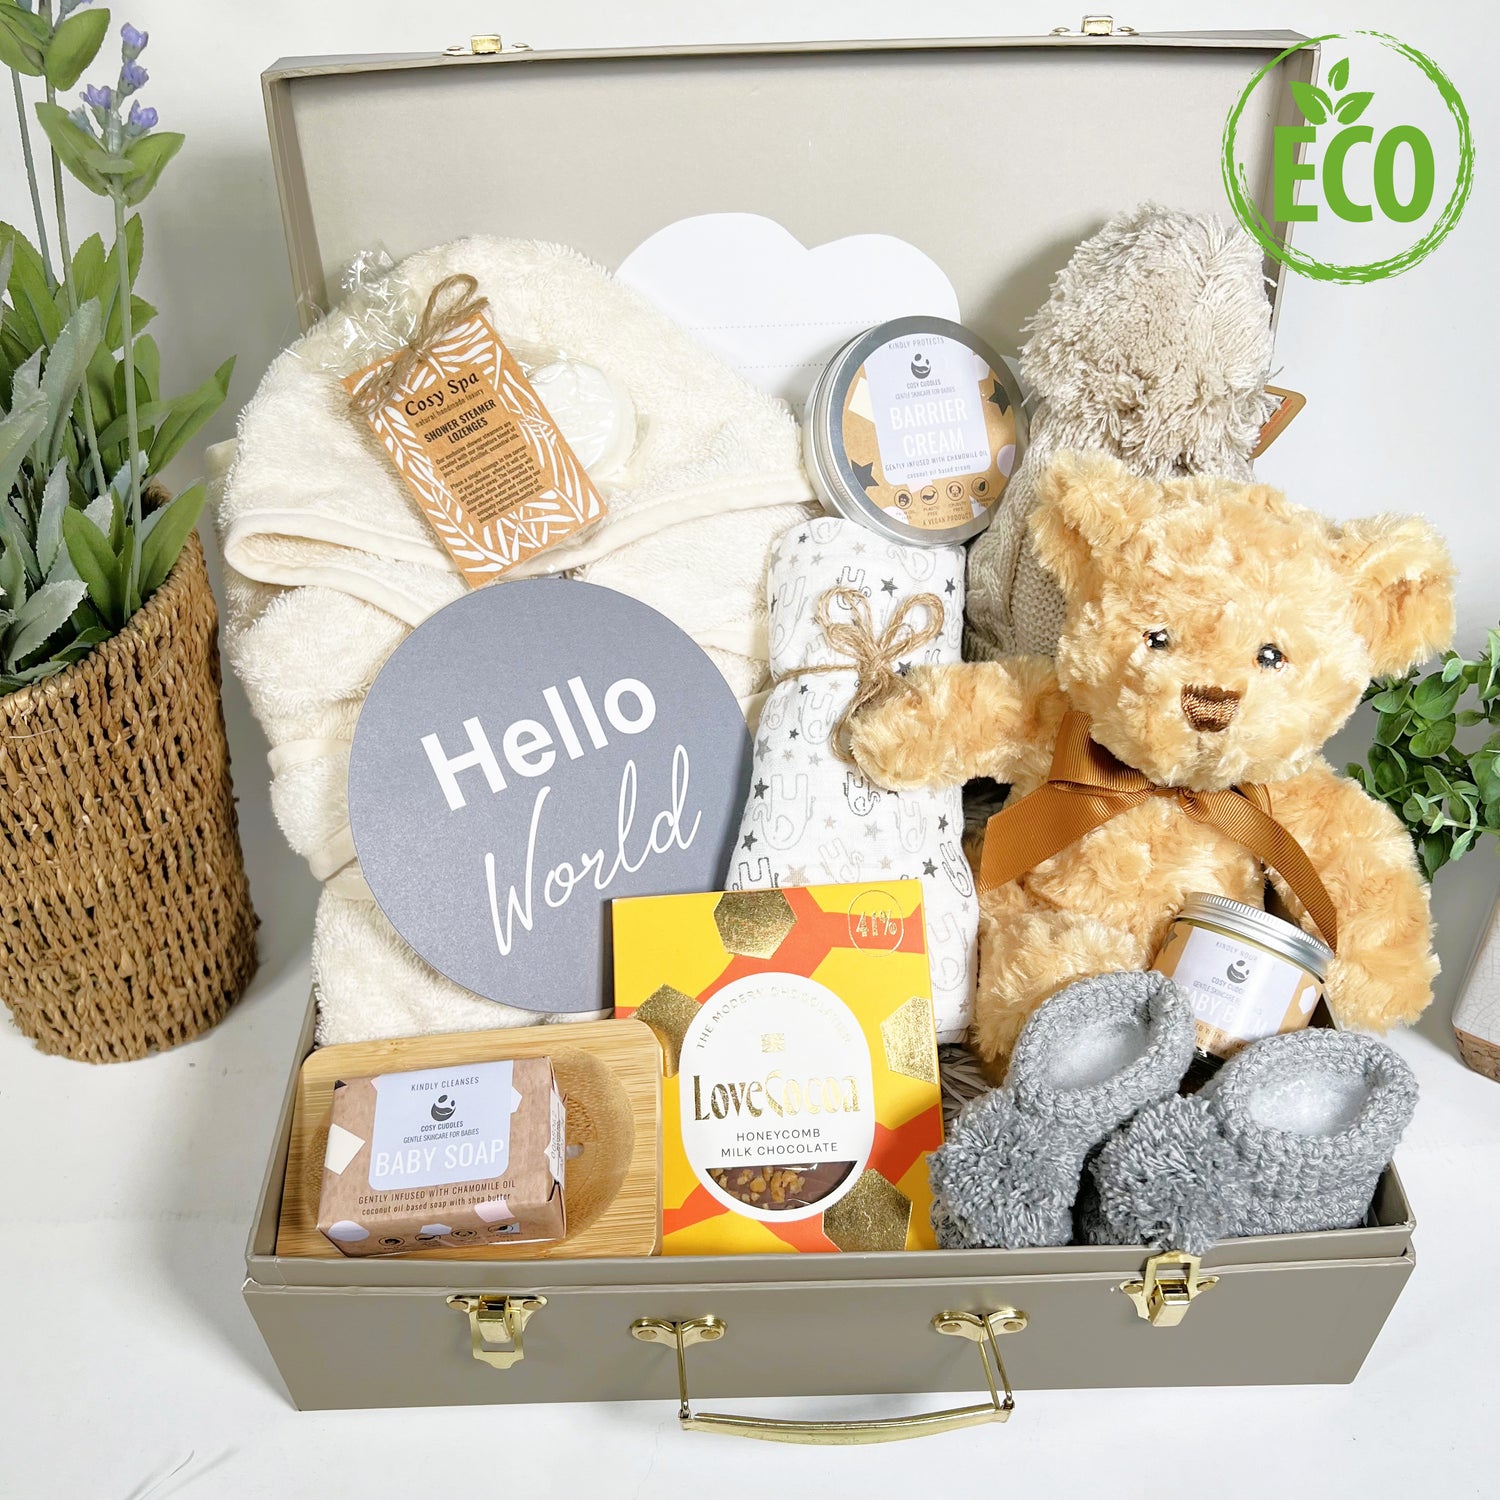 Gorgeous neutral new mummy and baby hamper containing eco friendly baby toiletries, a cotton baby dressing gown with hood, an eco friendly teddy bear baby toy, a baby pompom hat, a bar of chocolate and some shower spa steamers for Mummy, a pair of hand crocheted baby booties with pompoms,q muslin square and a "Hello World" plaque, all in a case